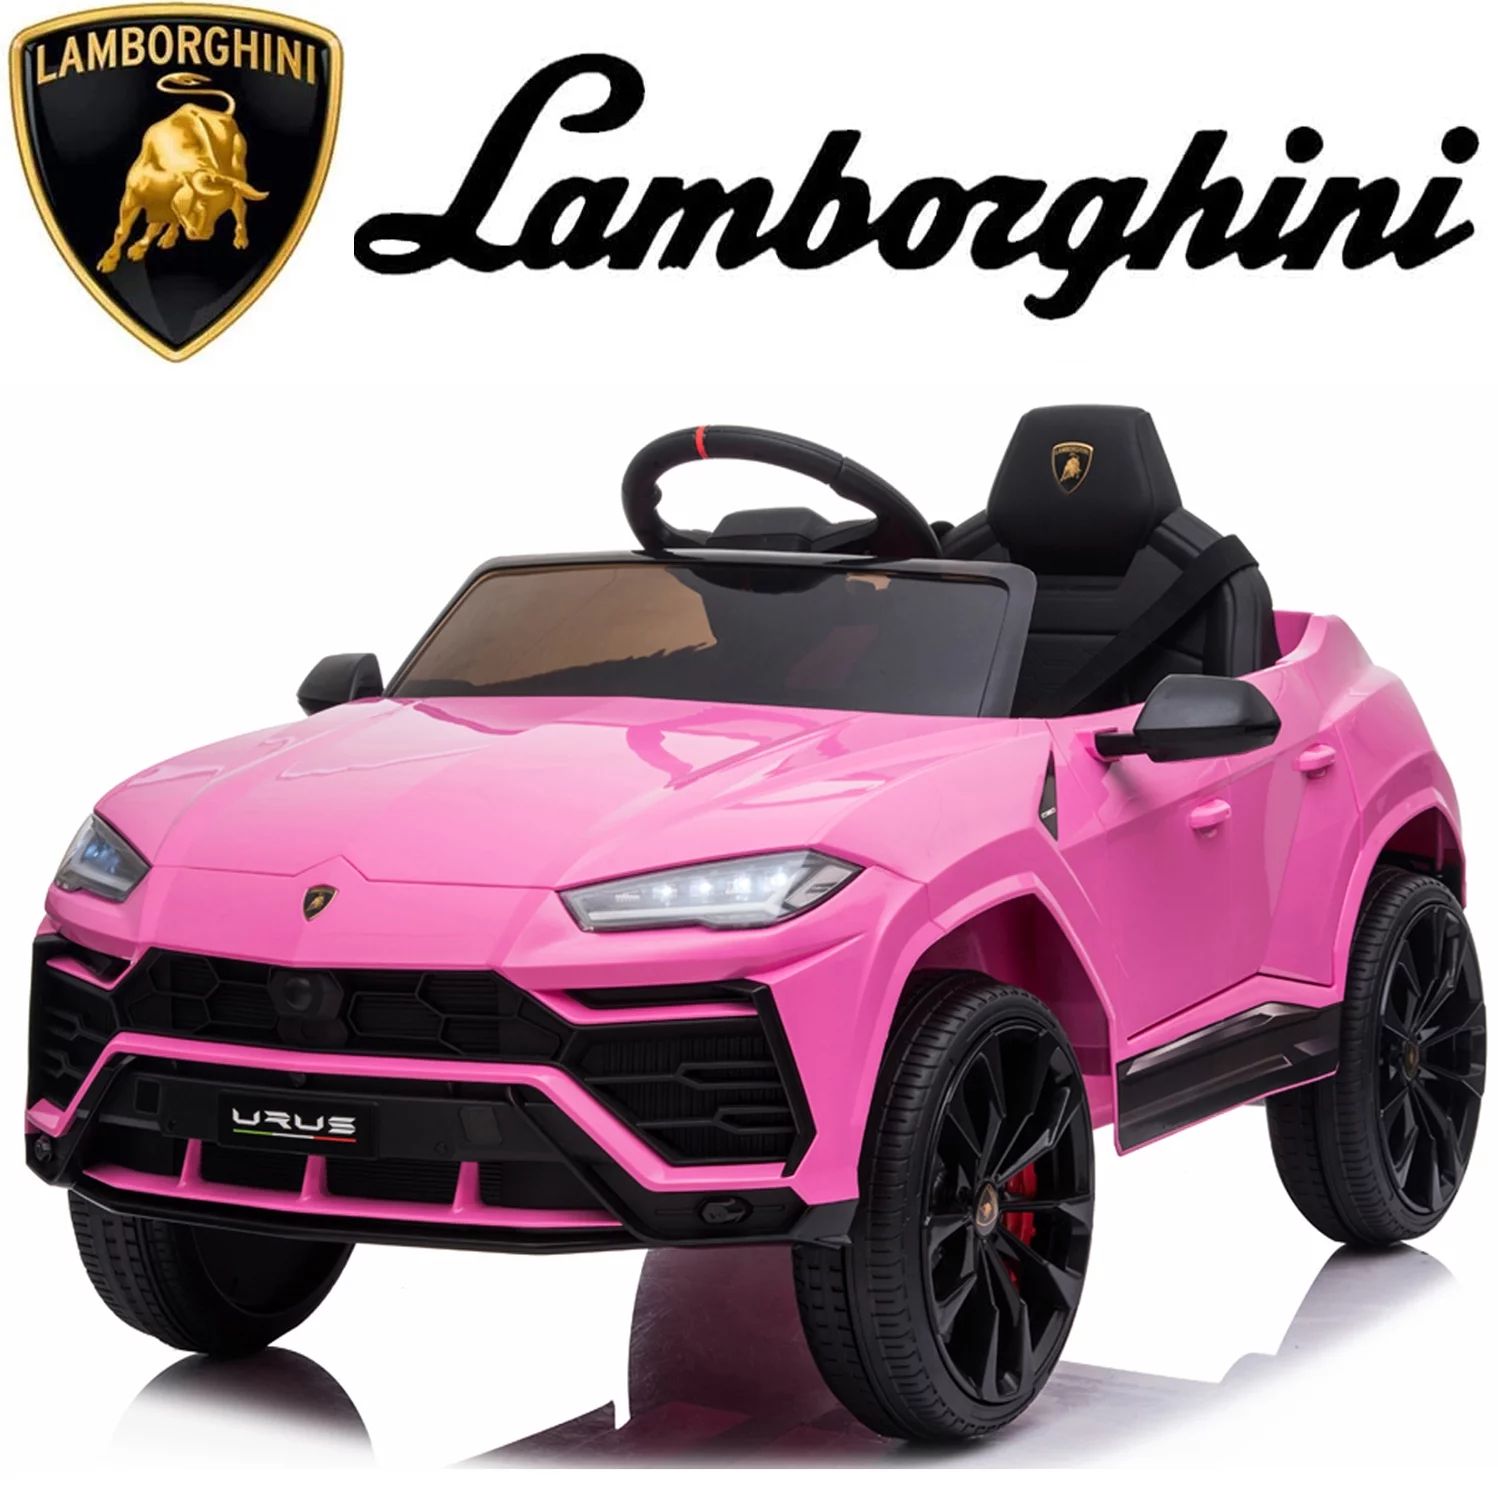 Lamborghini 12 V Powered Ride on Cars, Remote Control, Battery Powered, Pink | Walmart (US)